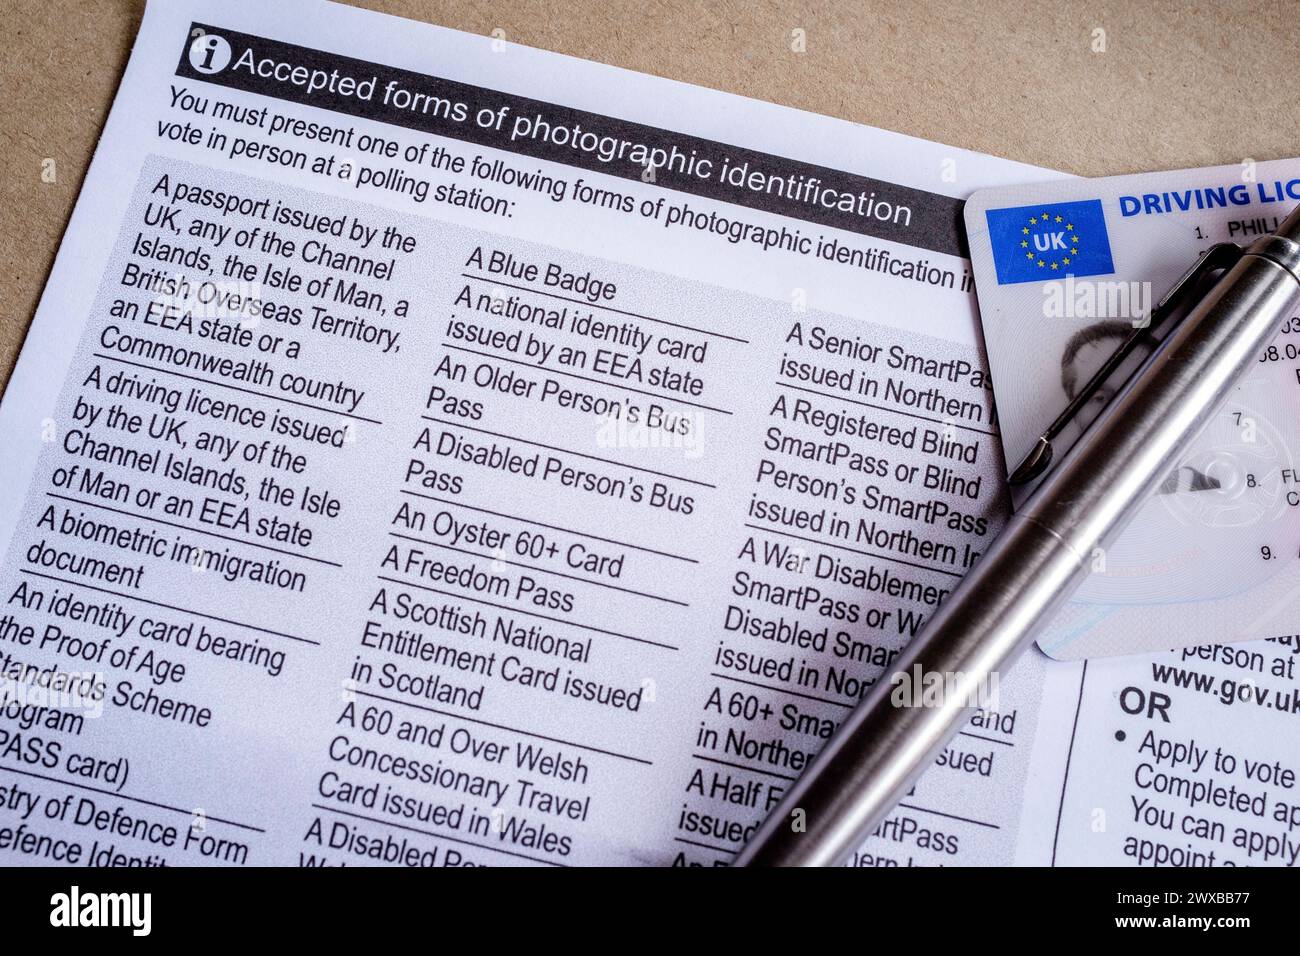 Poll card for Greater London Authority Elections stating accepted forms of photographic identification for voters. Stock Photo